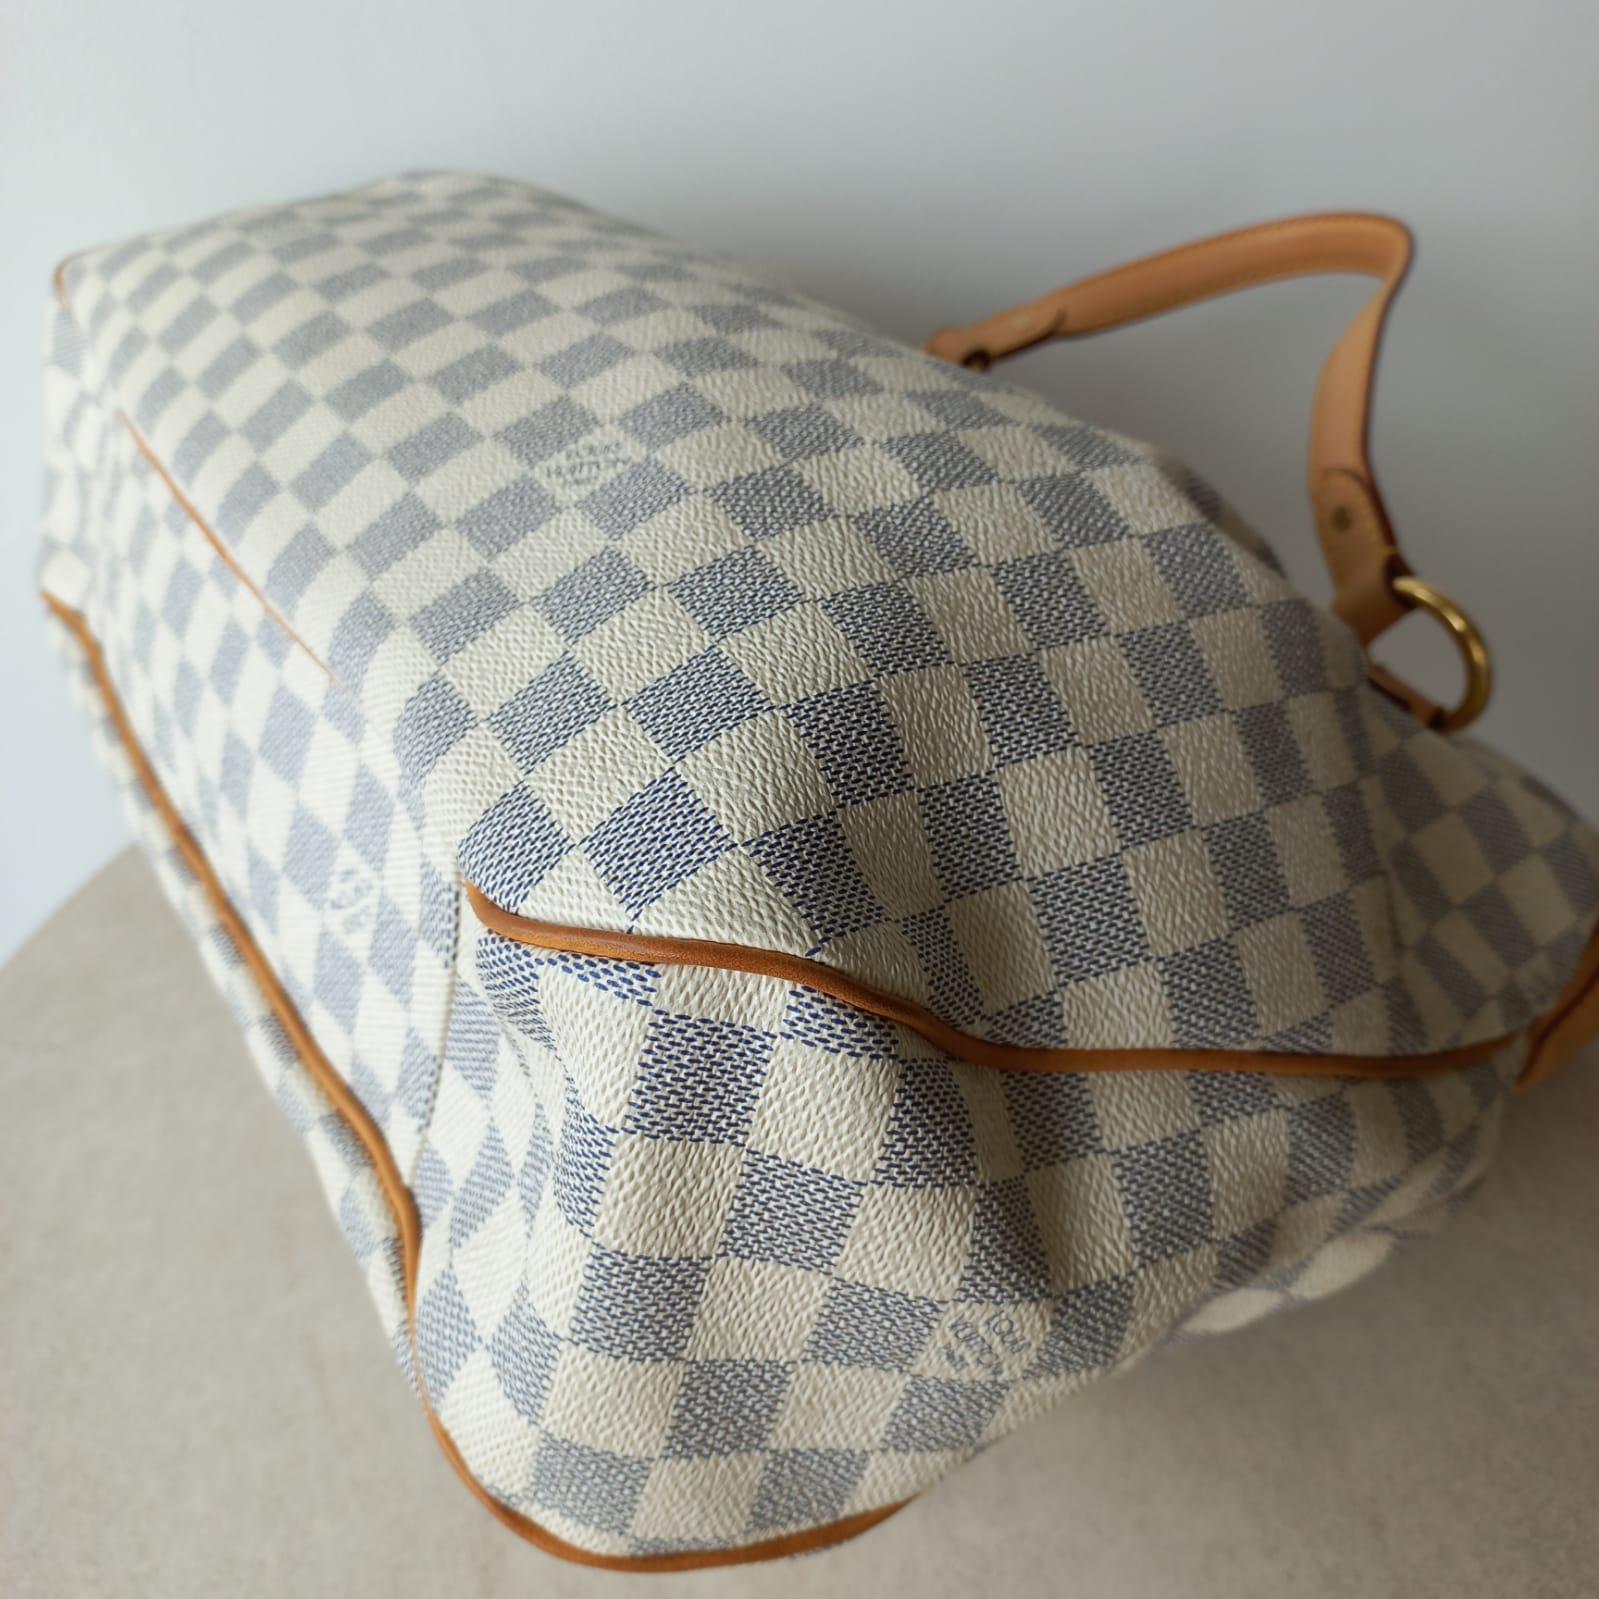 Damier Azur Evora Bag comes in great condition. Minor marks on the vachetta leather. Overall still in great condition.

Inclusion: Dust Bag, Strap

Year: 2011